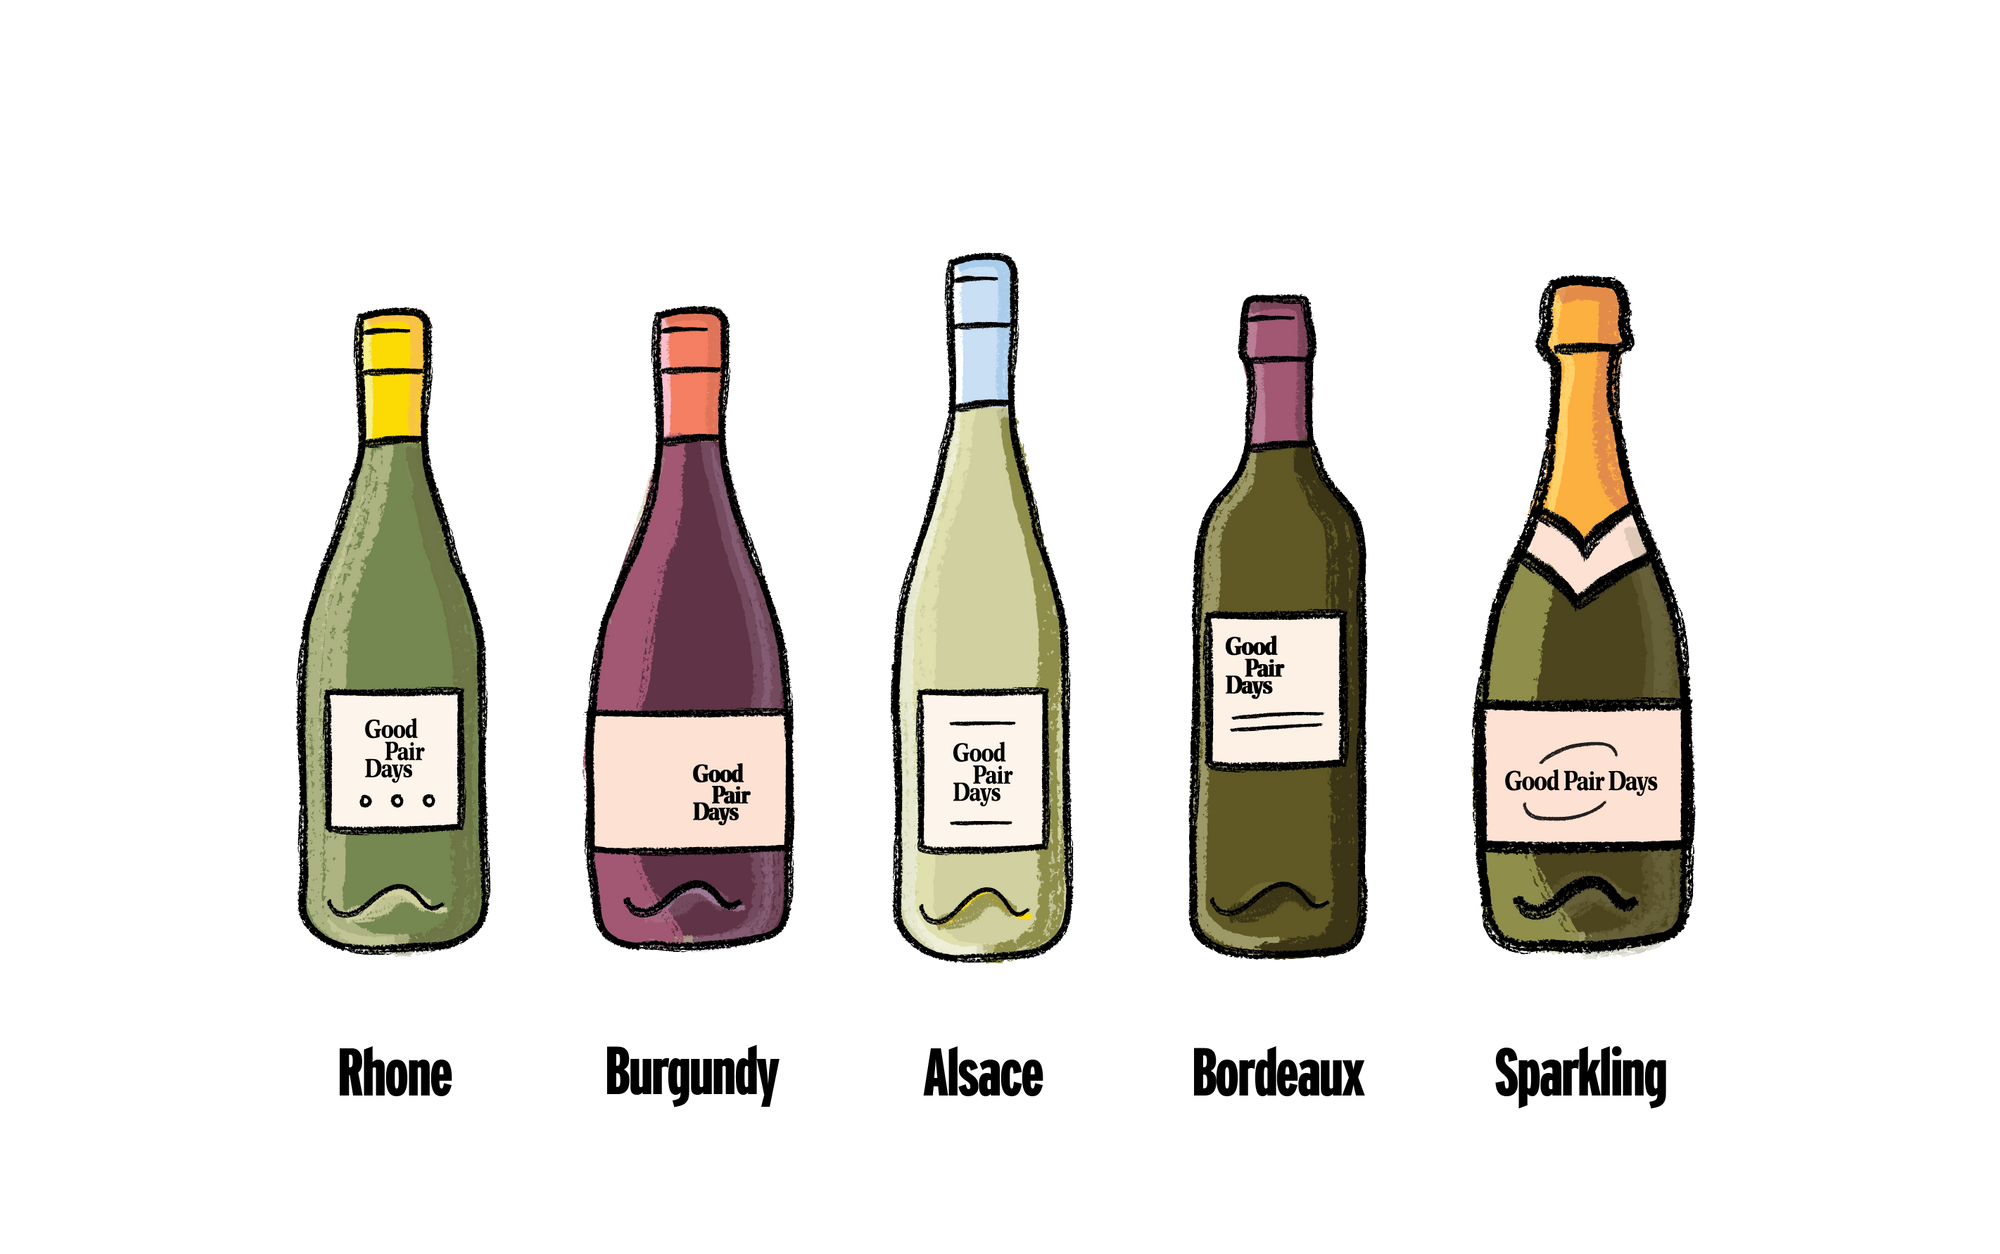 https://gpd-guides.ghost.io/content/images/2020/09/Wine_101_icons_bottle_shapes-14.png